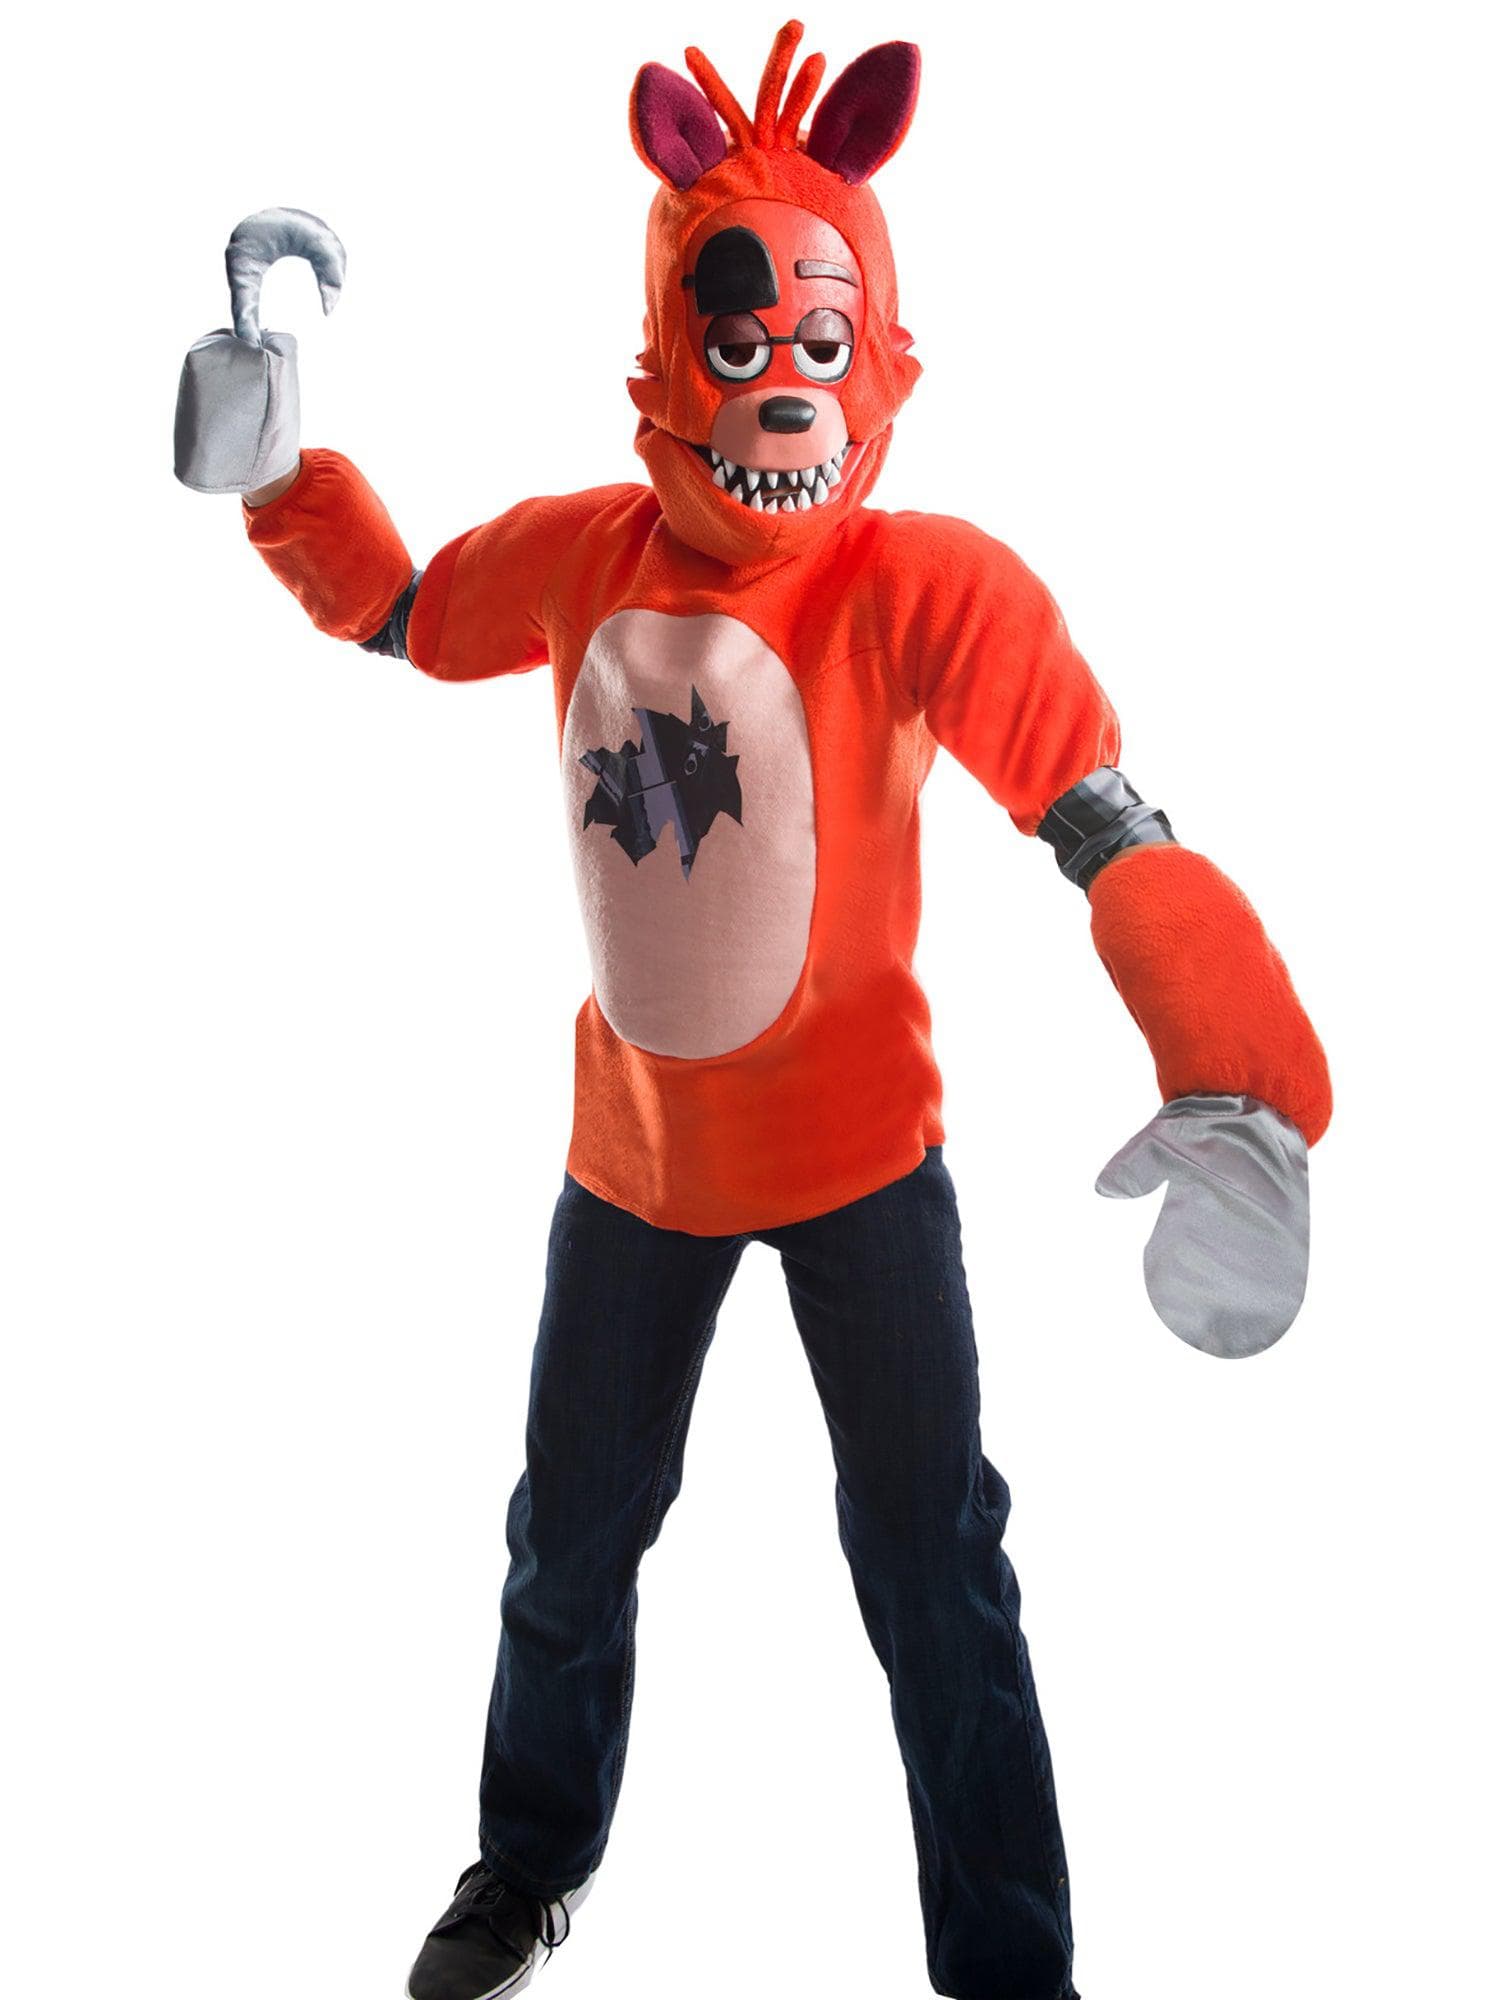 Kids Five Nights At Freddys Foxy Deluxe Costume - costumes.com